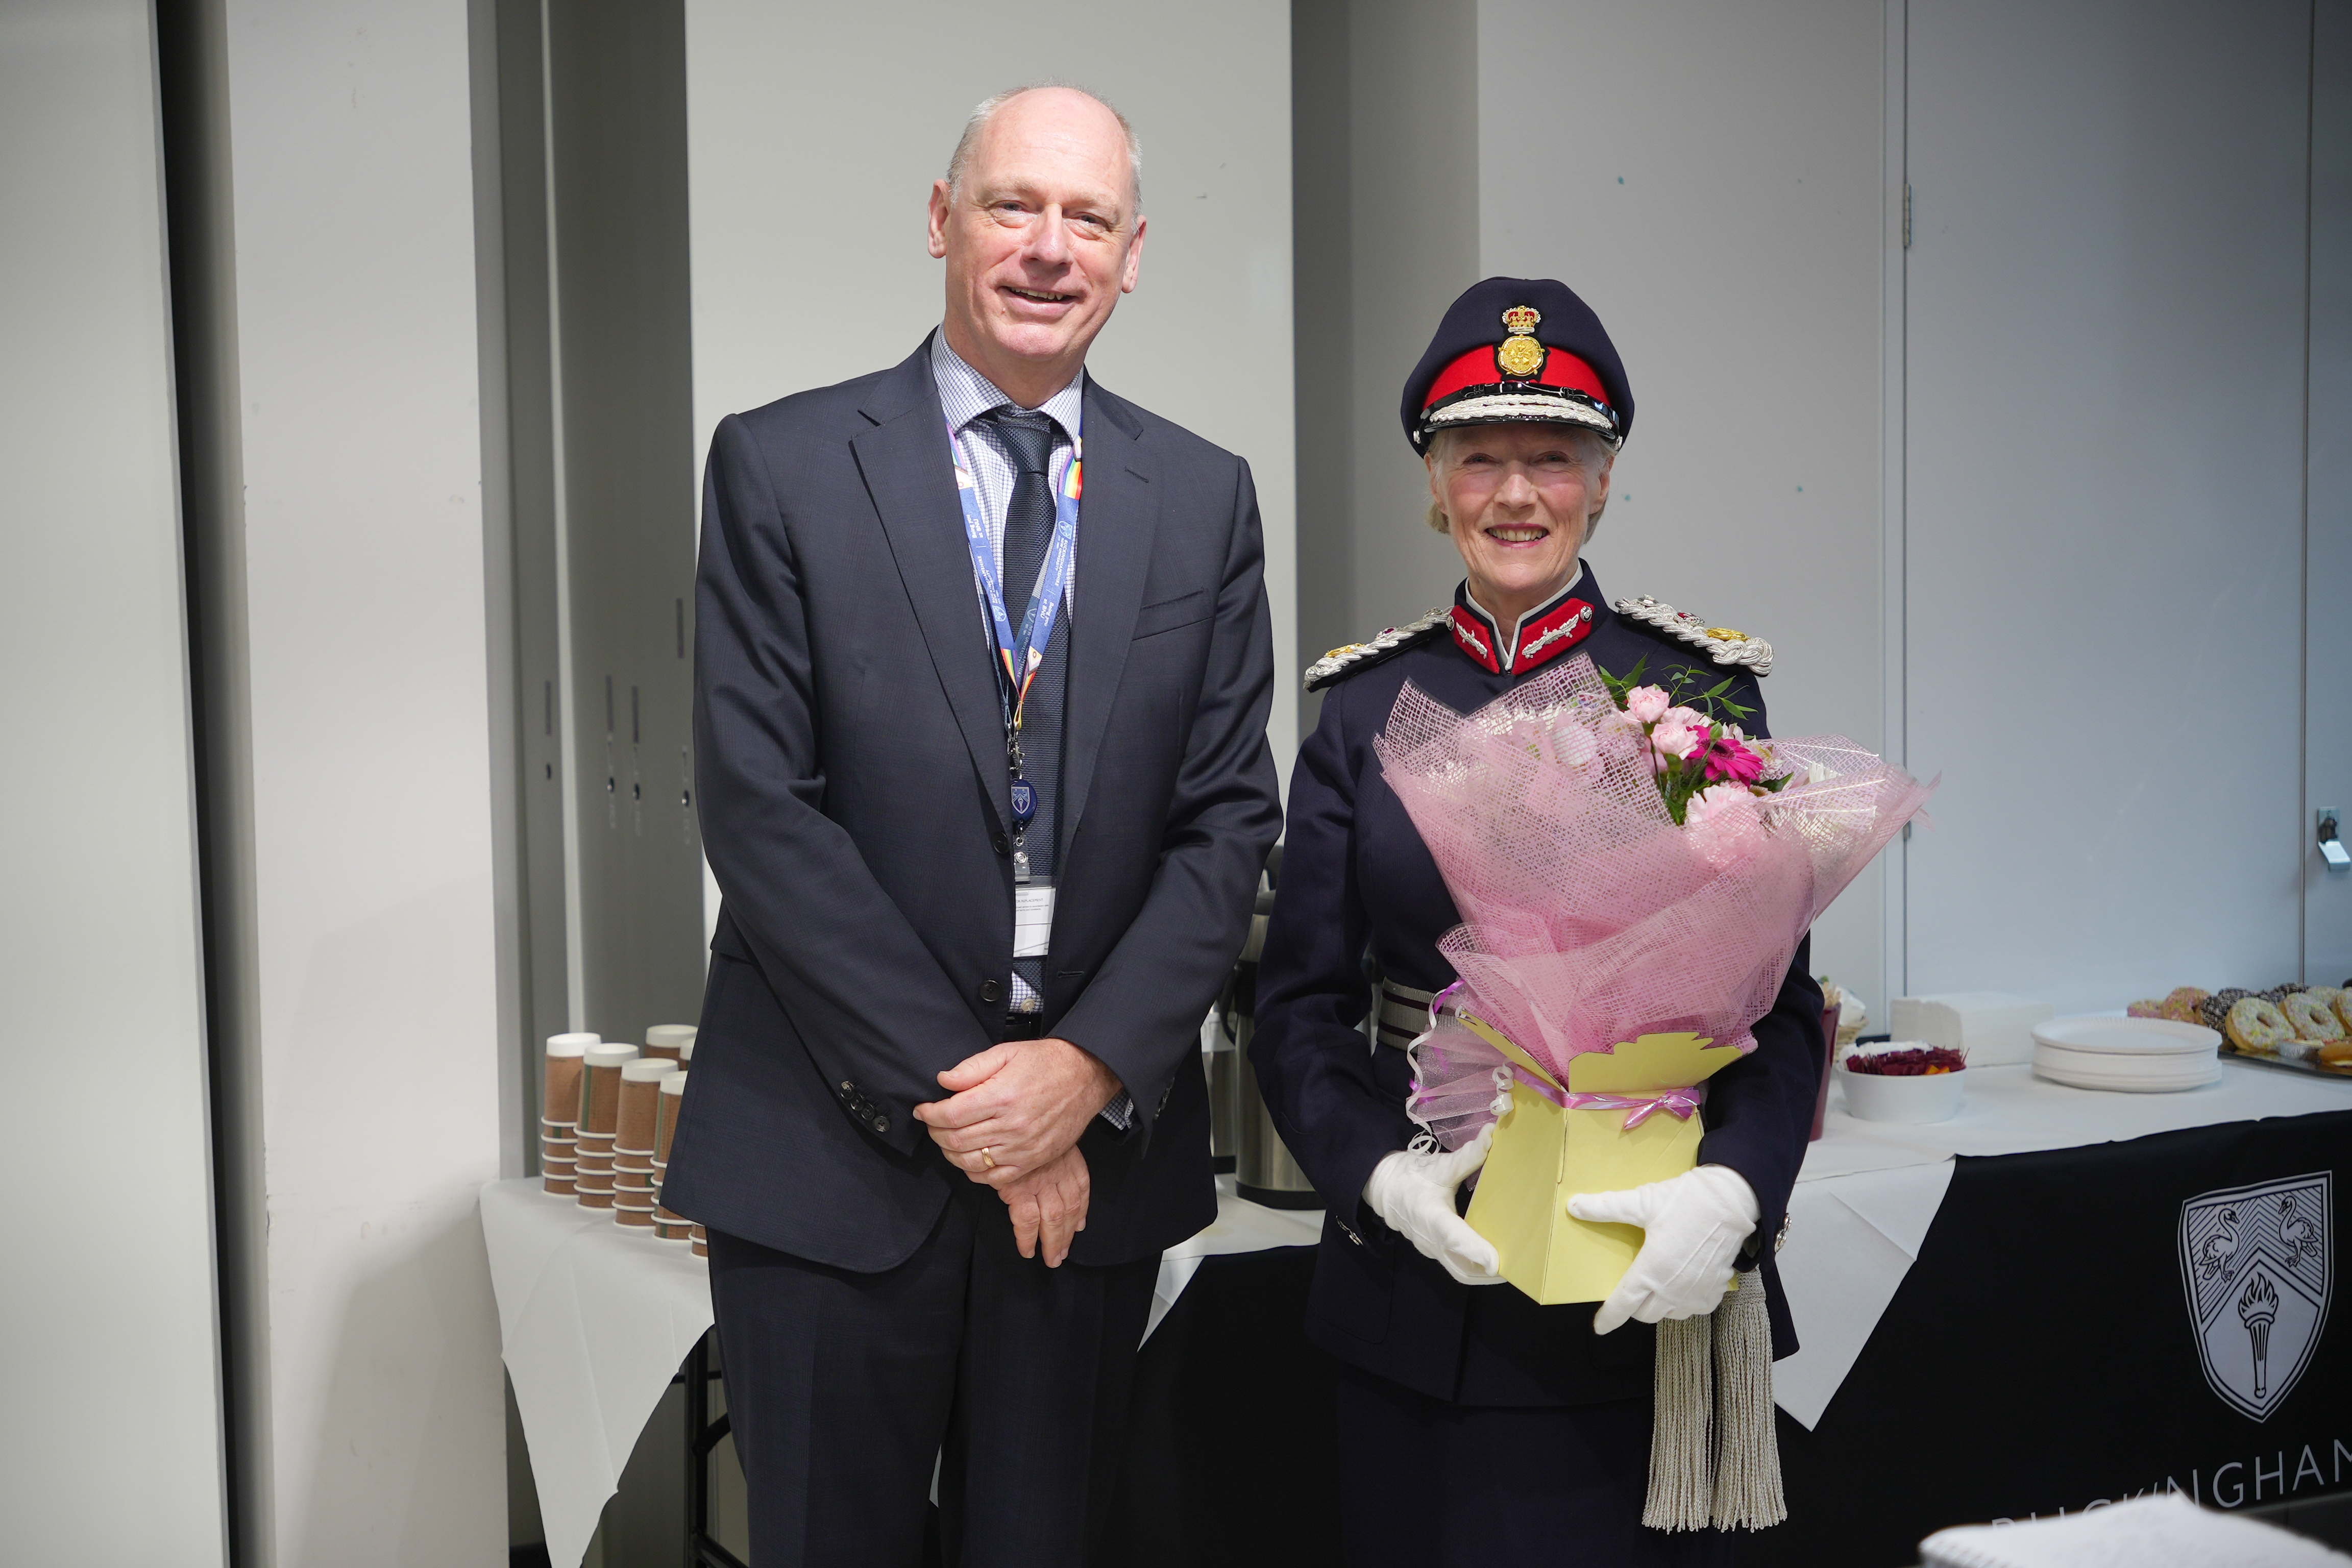 The Countess Howe receives flowers from the Vice-Chancellor